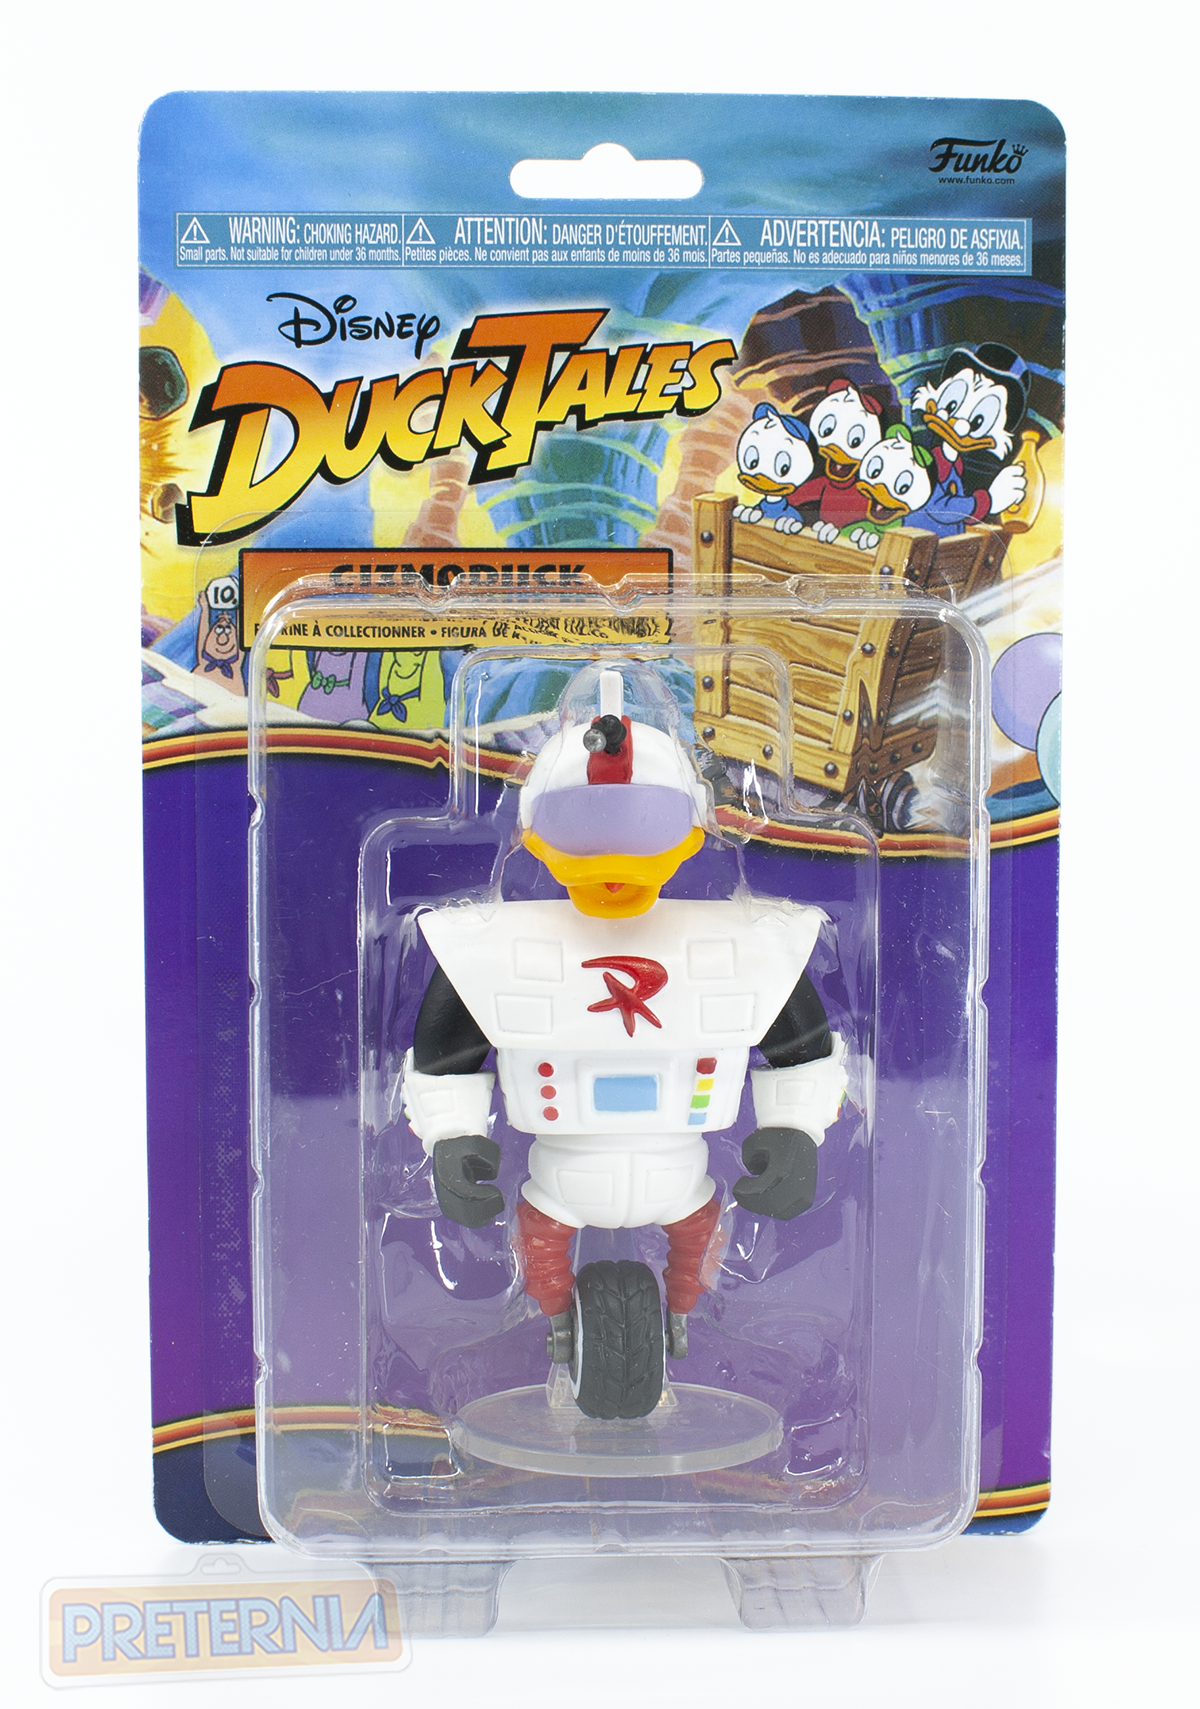 Funko Disney Afternoon 3.75-Inch Wave 2 Gadget, Launchpad, and King Louie) - Preternia